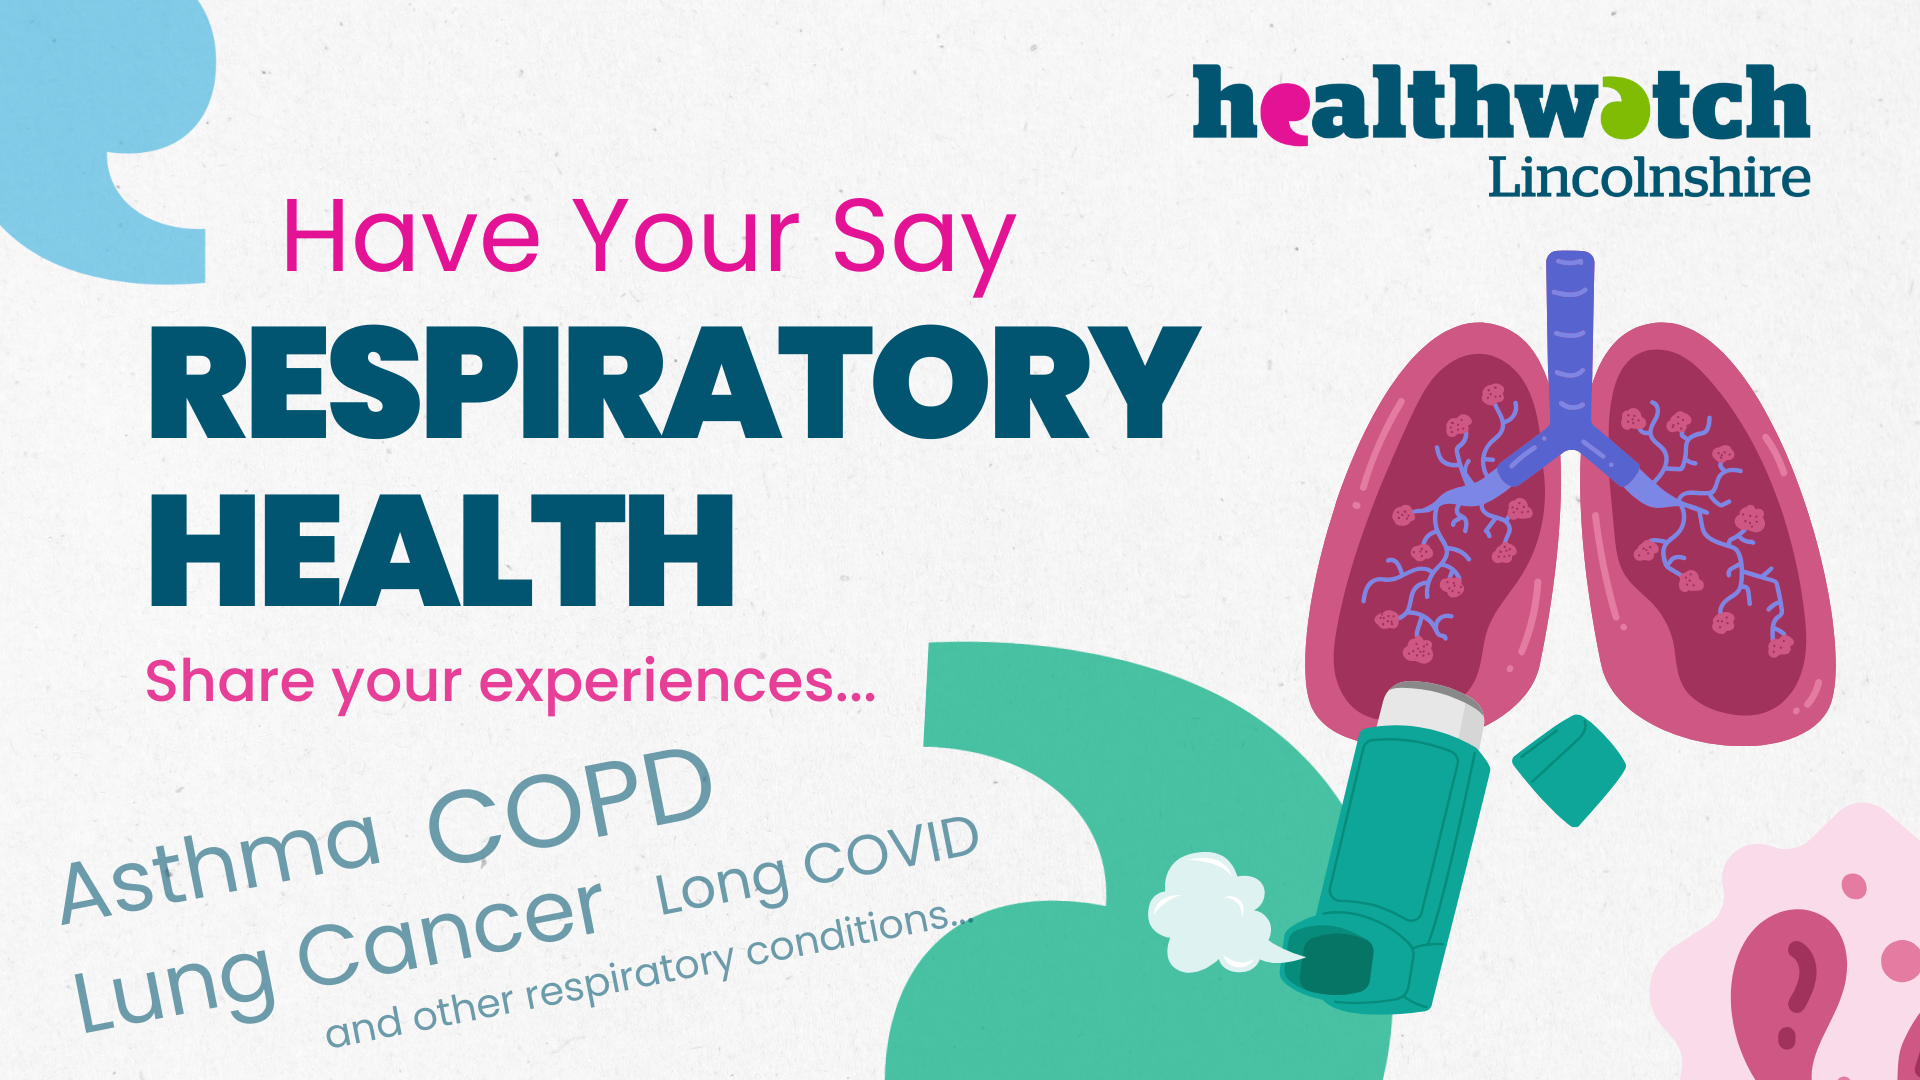  Have your say on Respiratory Health - Share your experiences